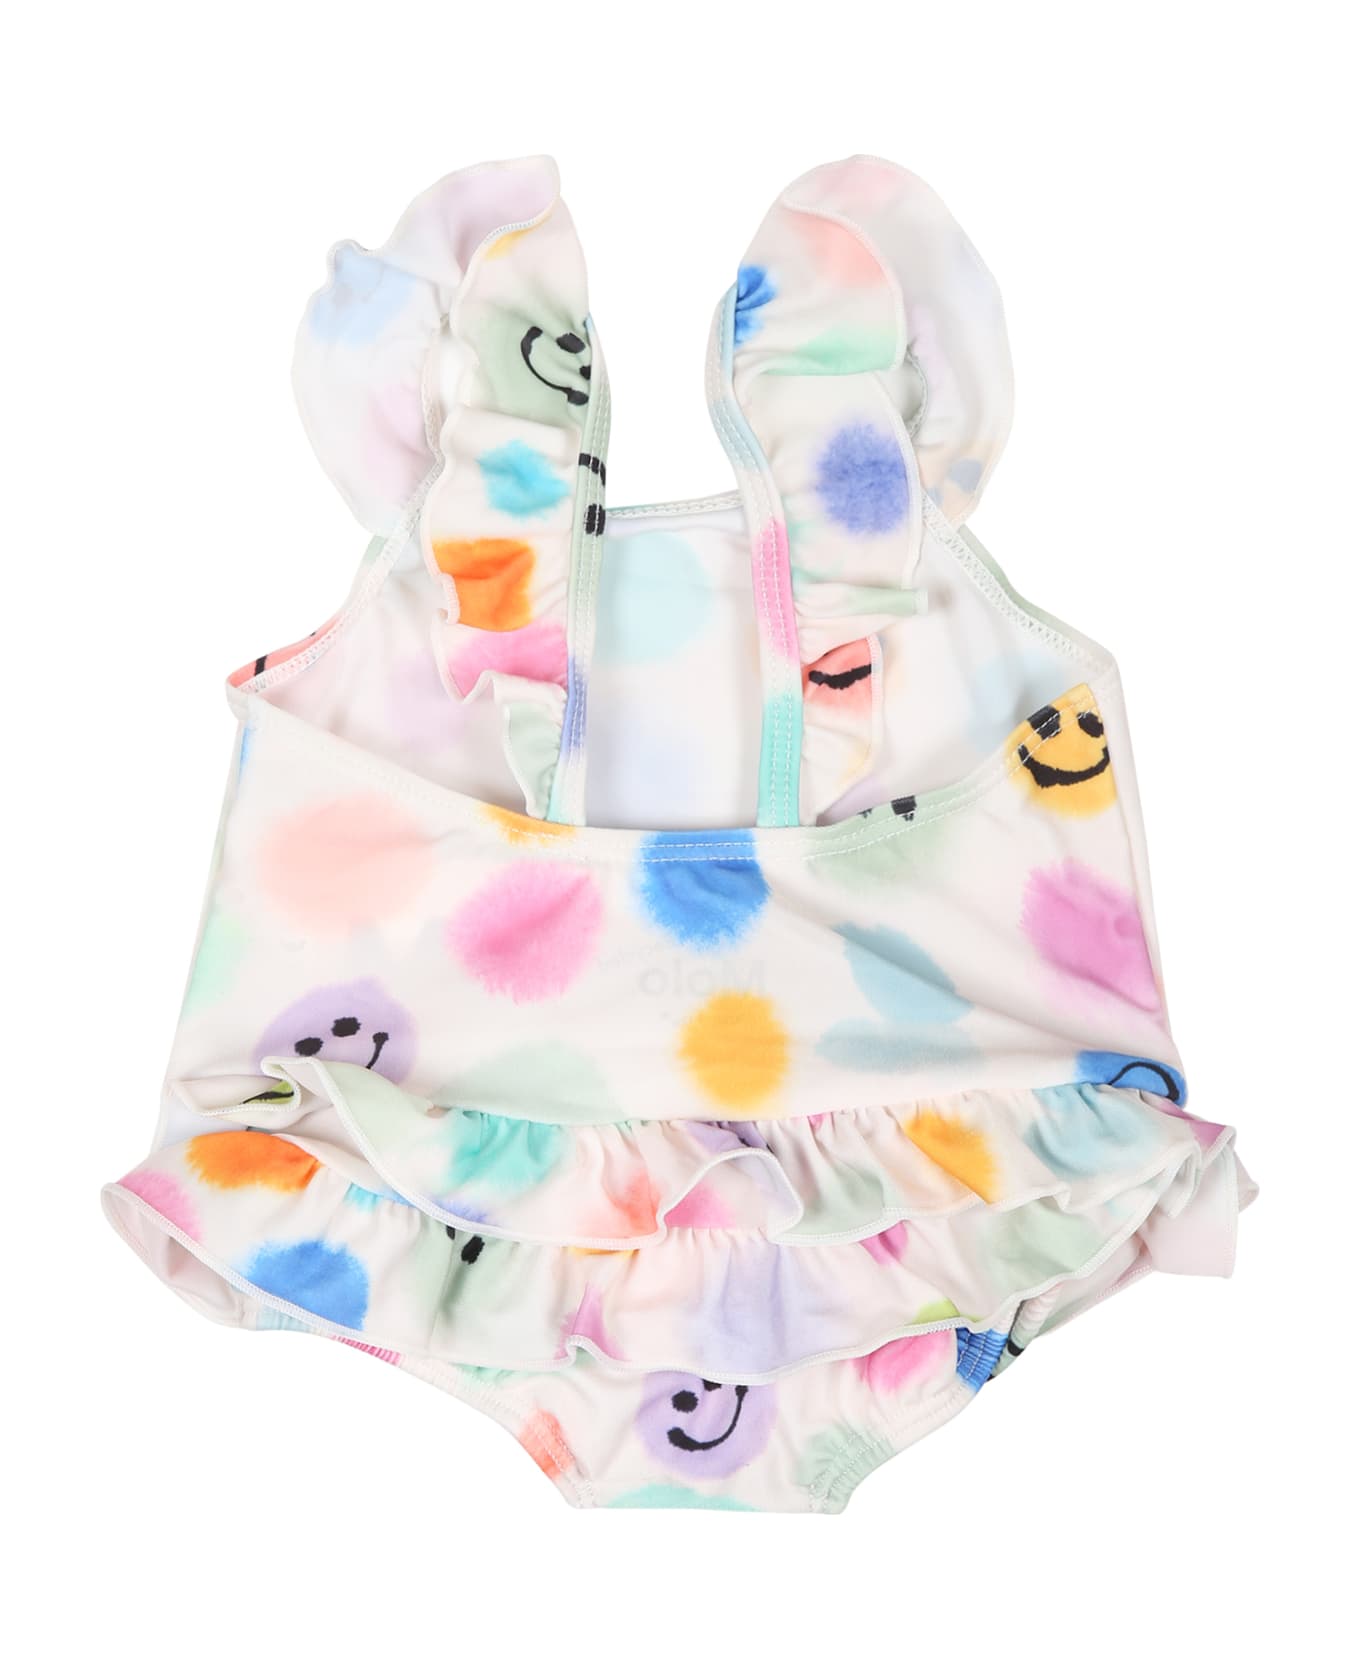 Molo White Swimsuit For Baby Girl With Polka Dots And Smile - Multicolor